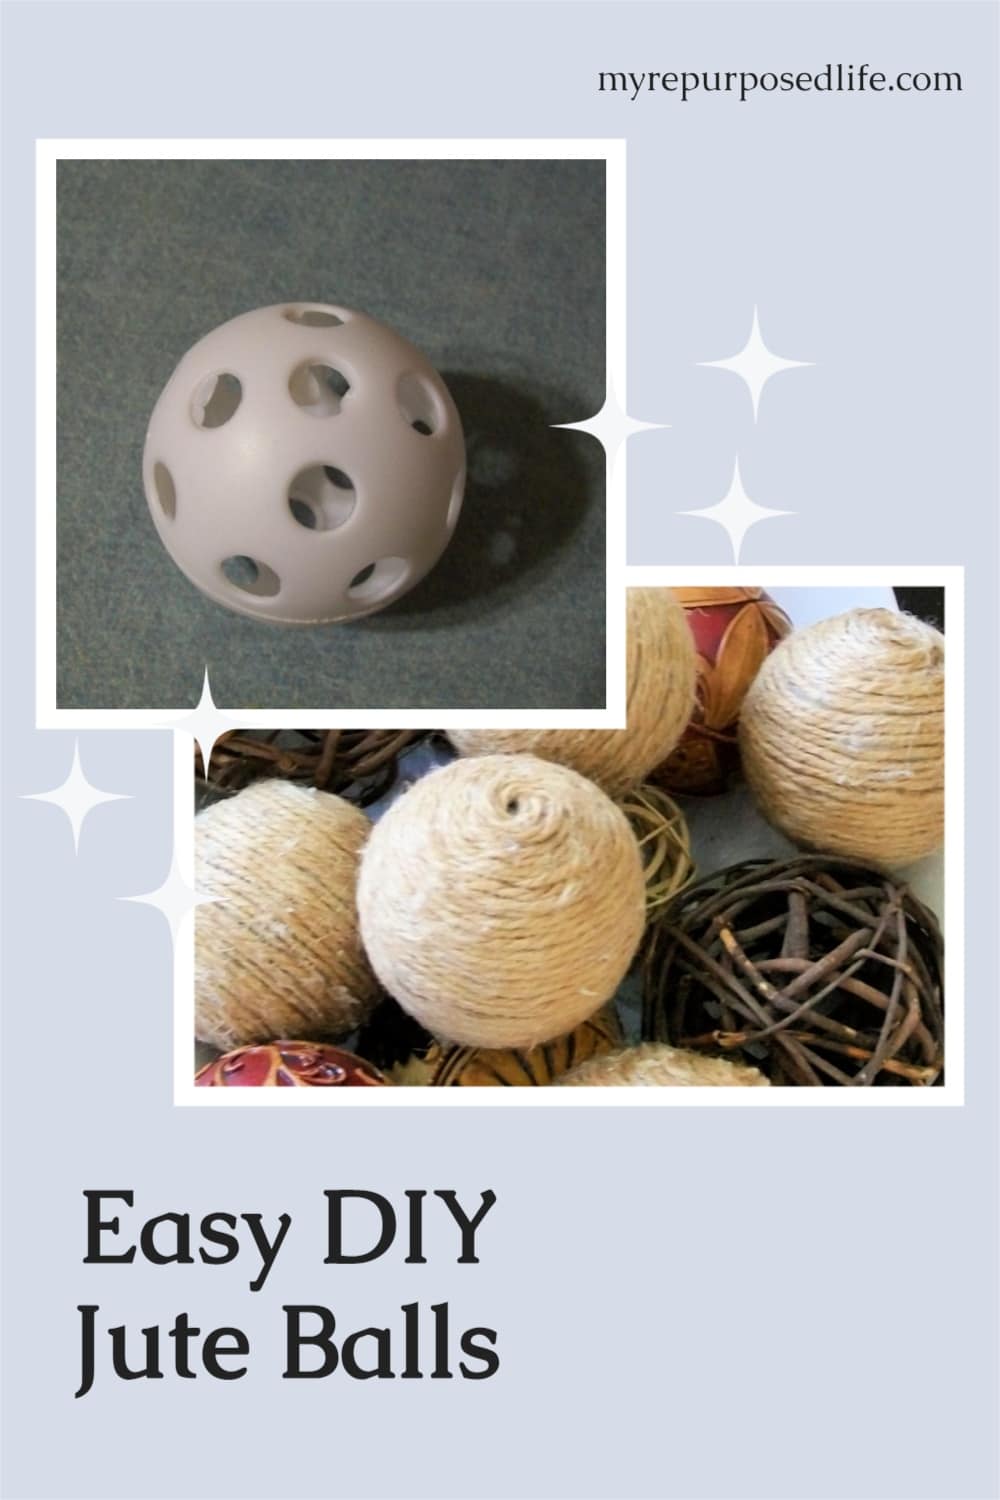 Easy project, fill your vase bowl or basket with these DIY rope wrapped whiffle balls. An inexpensive way to change up your decor for the seasons. So many possibilities of balls, twine and rope! #MyRepurposedLife #homedecor #DIY #rope #orbs #bowl #basket #vase #filler via @repurposedlife